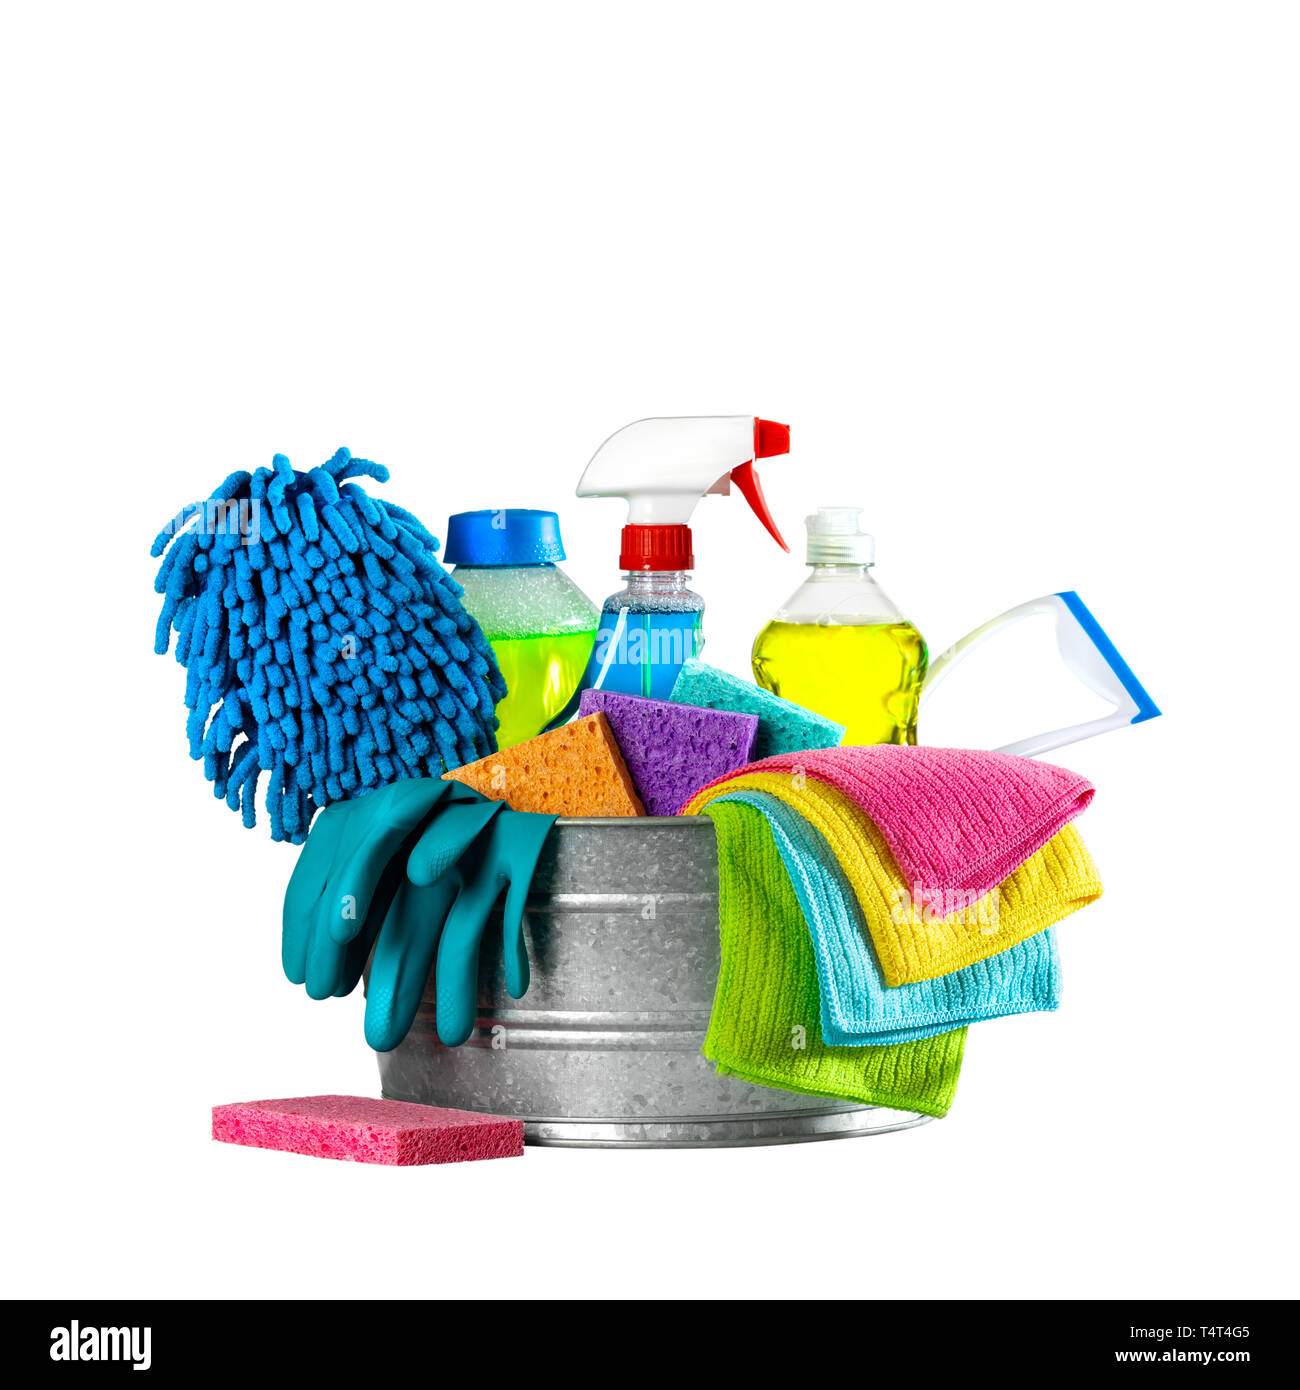 Bucket Of Cleaning Supplies On Isolated White Background Cleaning